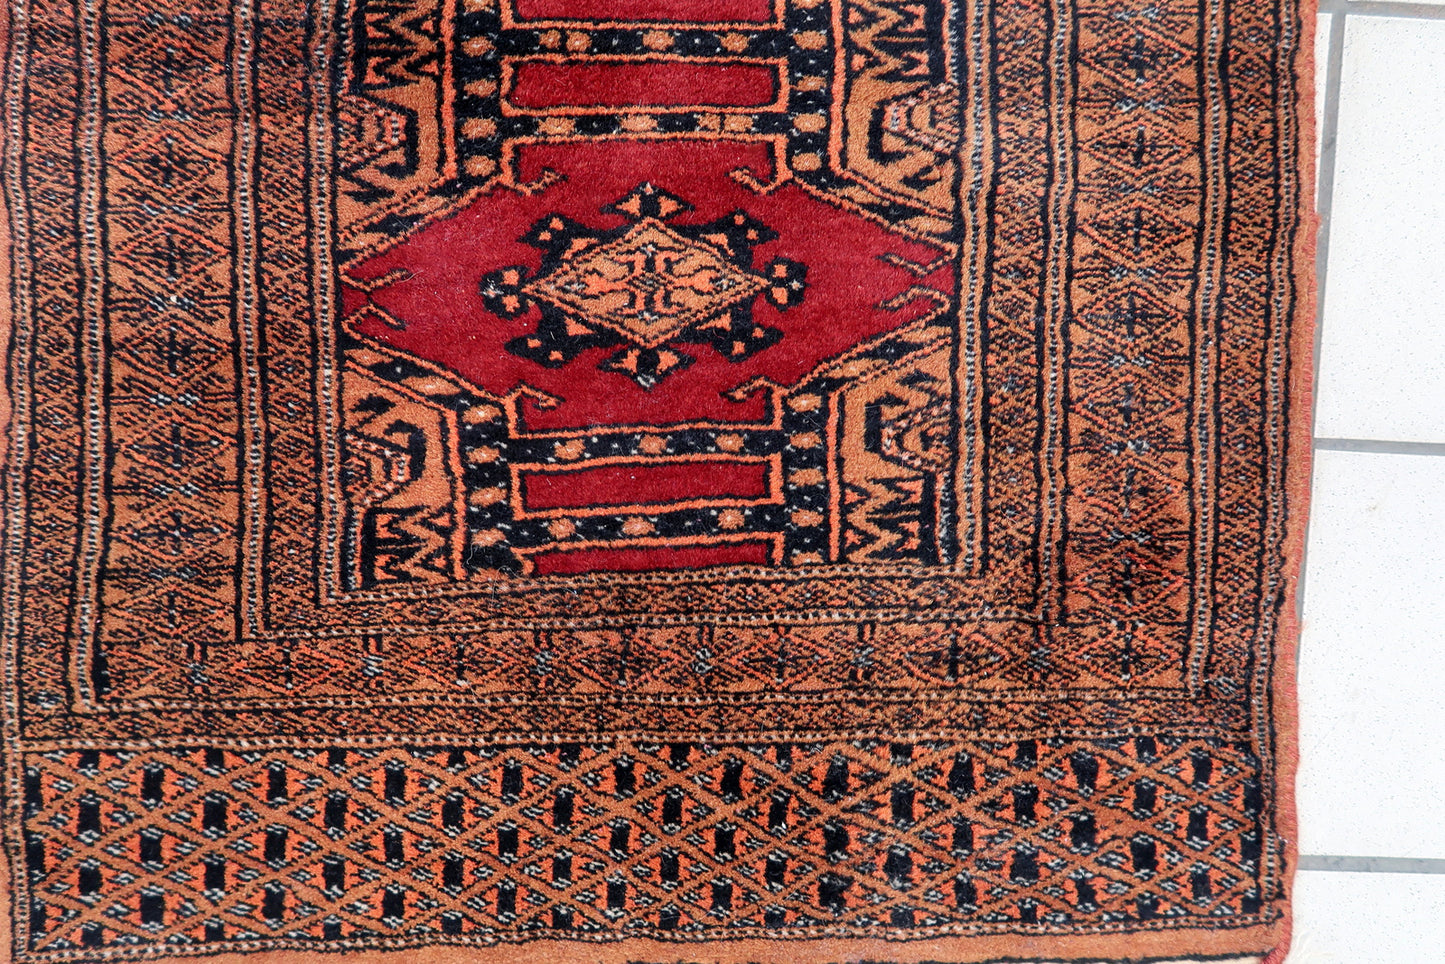 Handmade vintage Uzbek Bukhara narrow rug in red wool. The rug has unusual tribal design. It is from the end of 20th century, in original good condition.